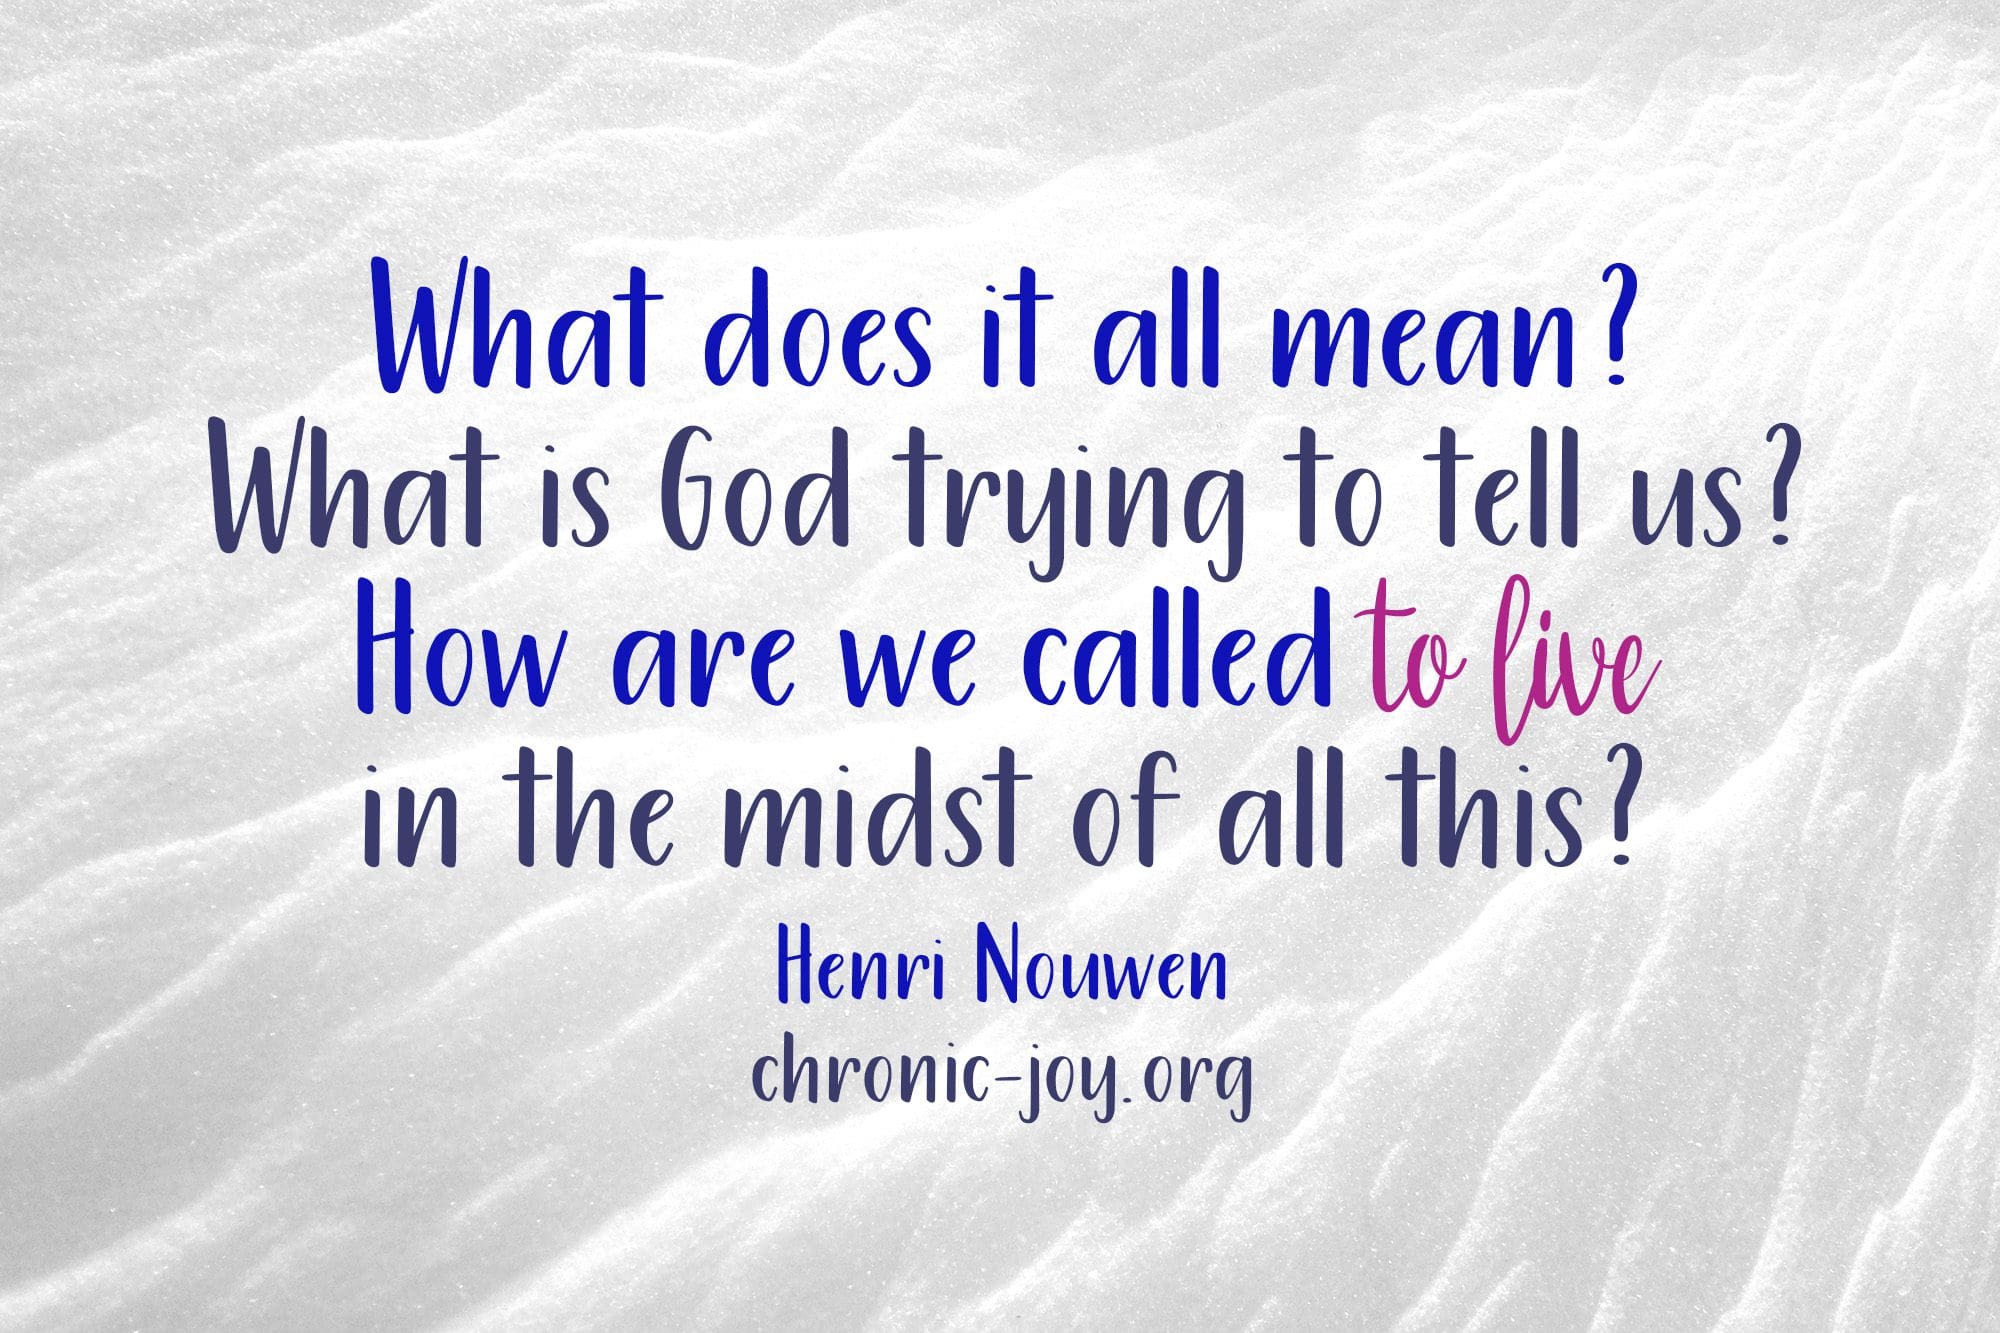 "What does it all mean? What is God trying to tell us? How are we called to live in the midst of all this?" Henri Nouwen